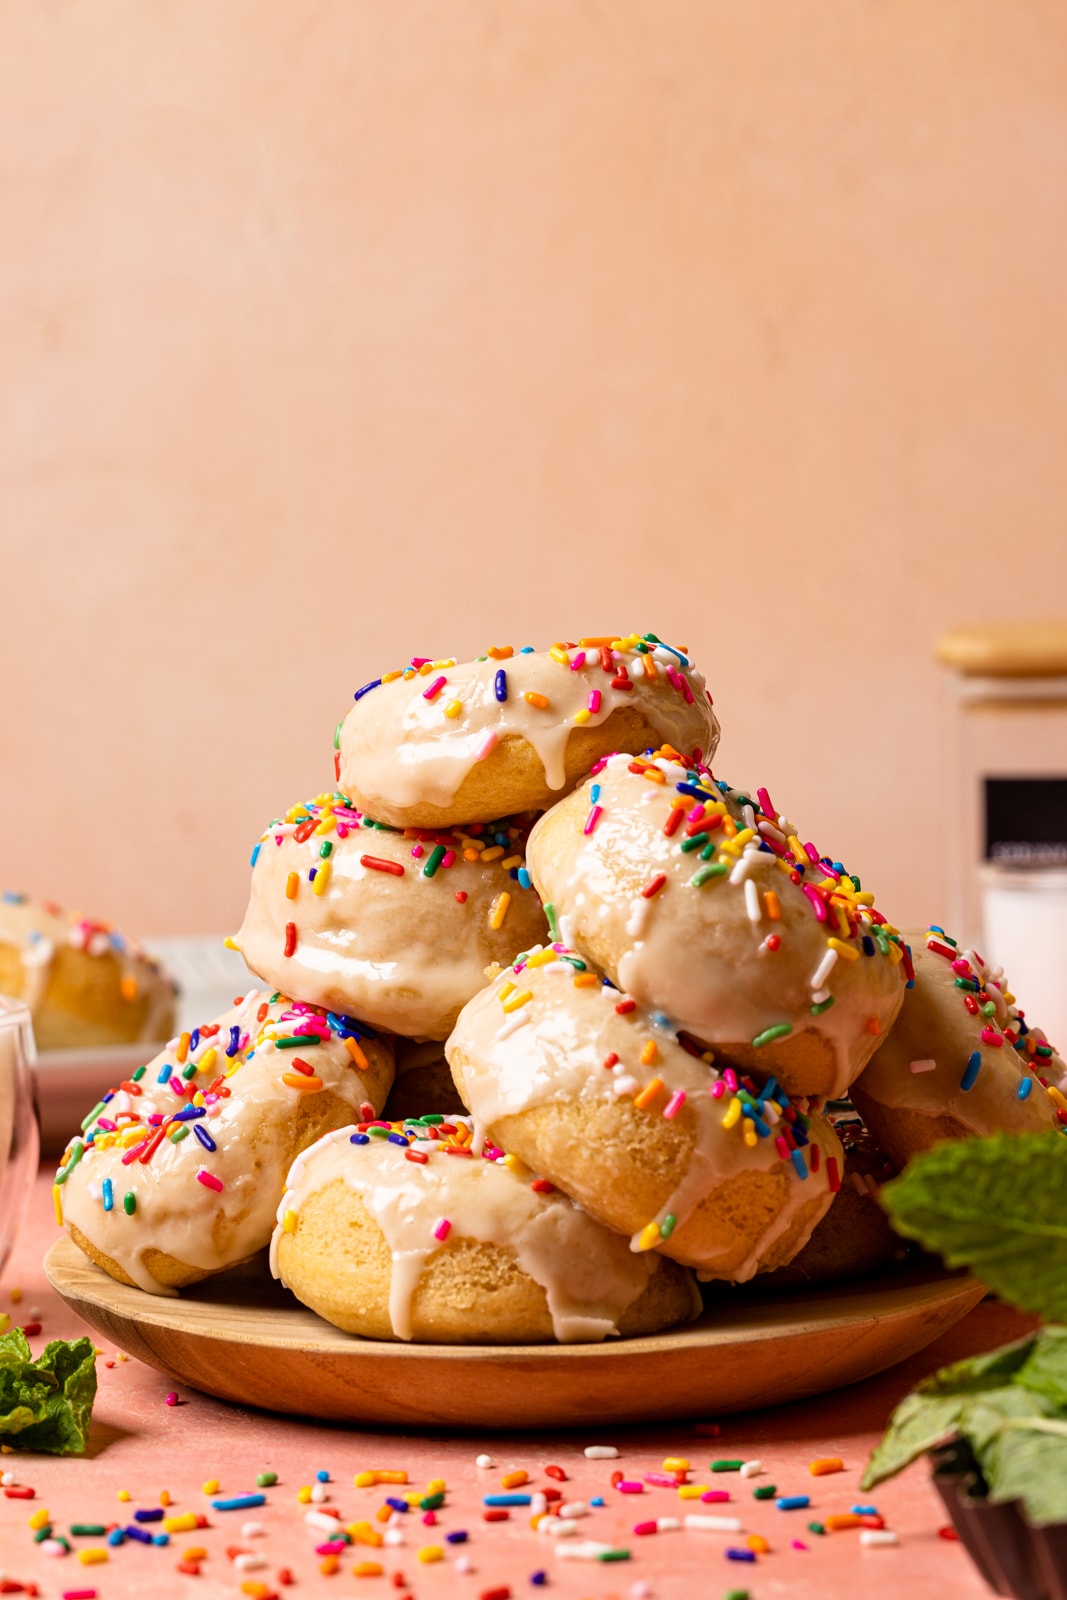 Stacks of frosted donuts on a plate on a pink table with rainbow sprinkles and garnish of herbs.